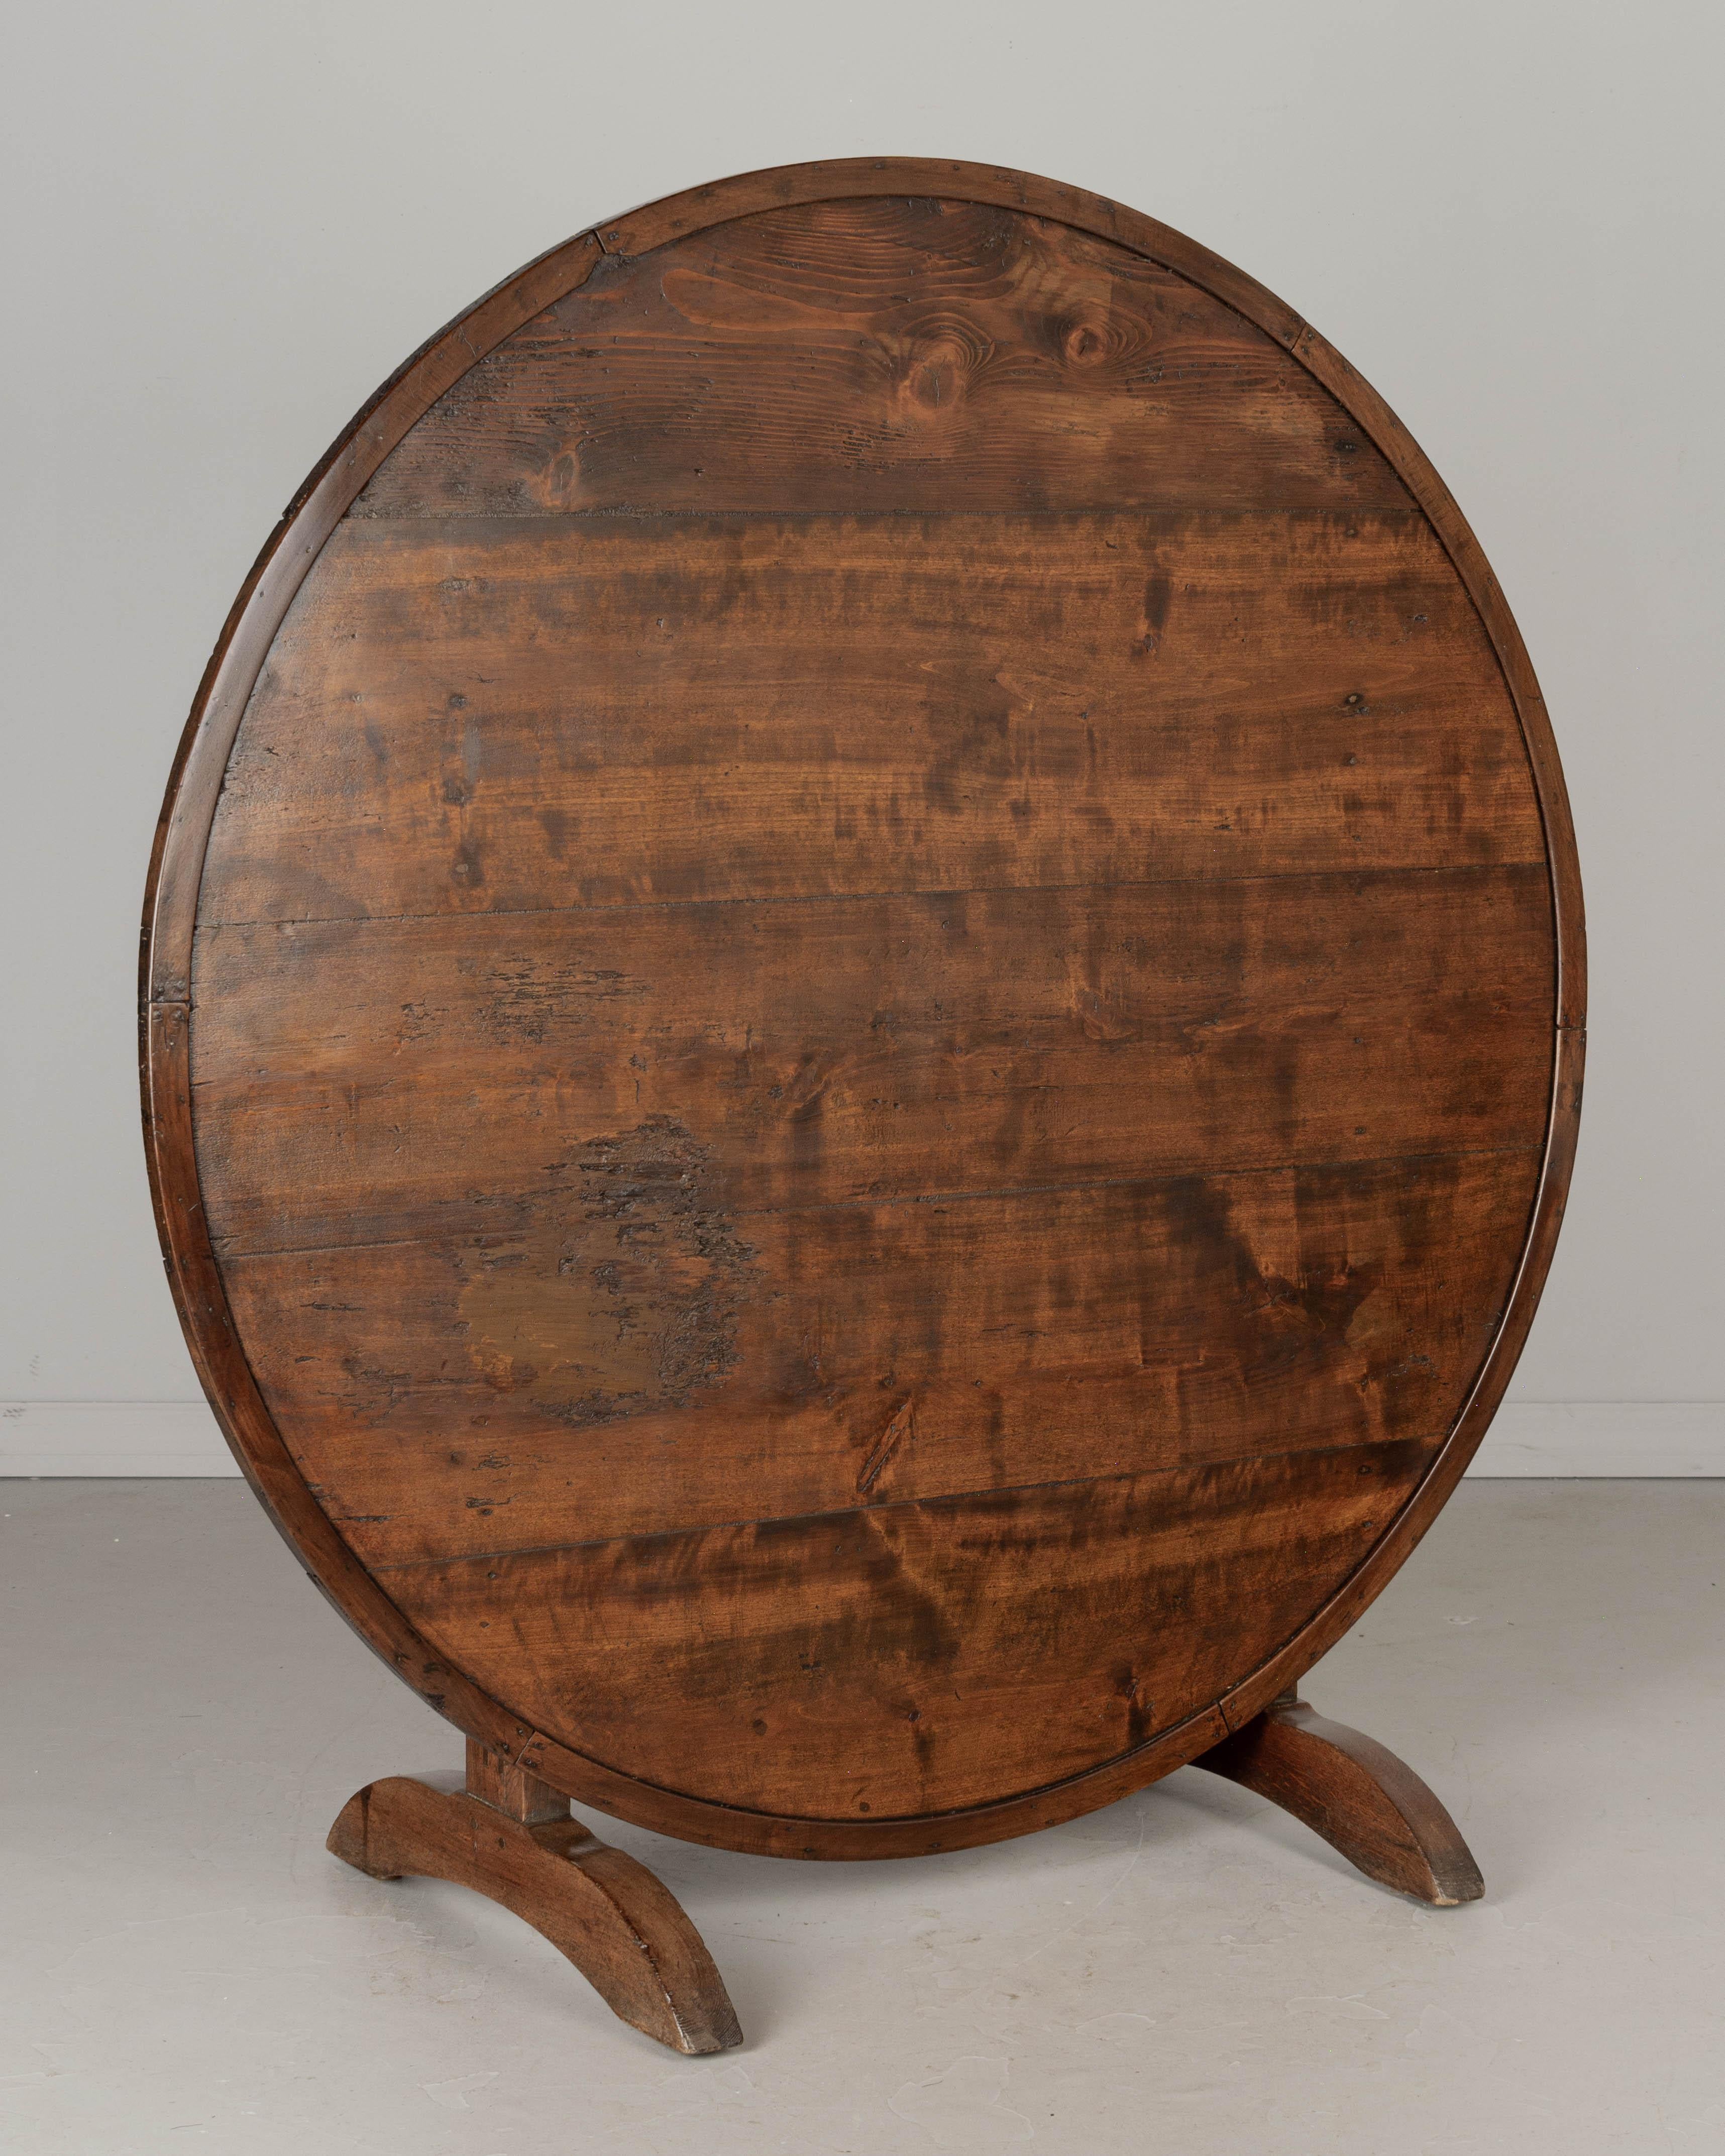 A large 19th century French wine tasting, or tilt-top table with pine plank top, sturdy solid oak base and walnut banding around the edge. Well-crafted with mortise and tenon joints and pegged construction. Top has a rustic worn surface with a worn